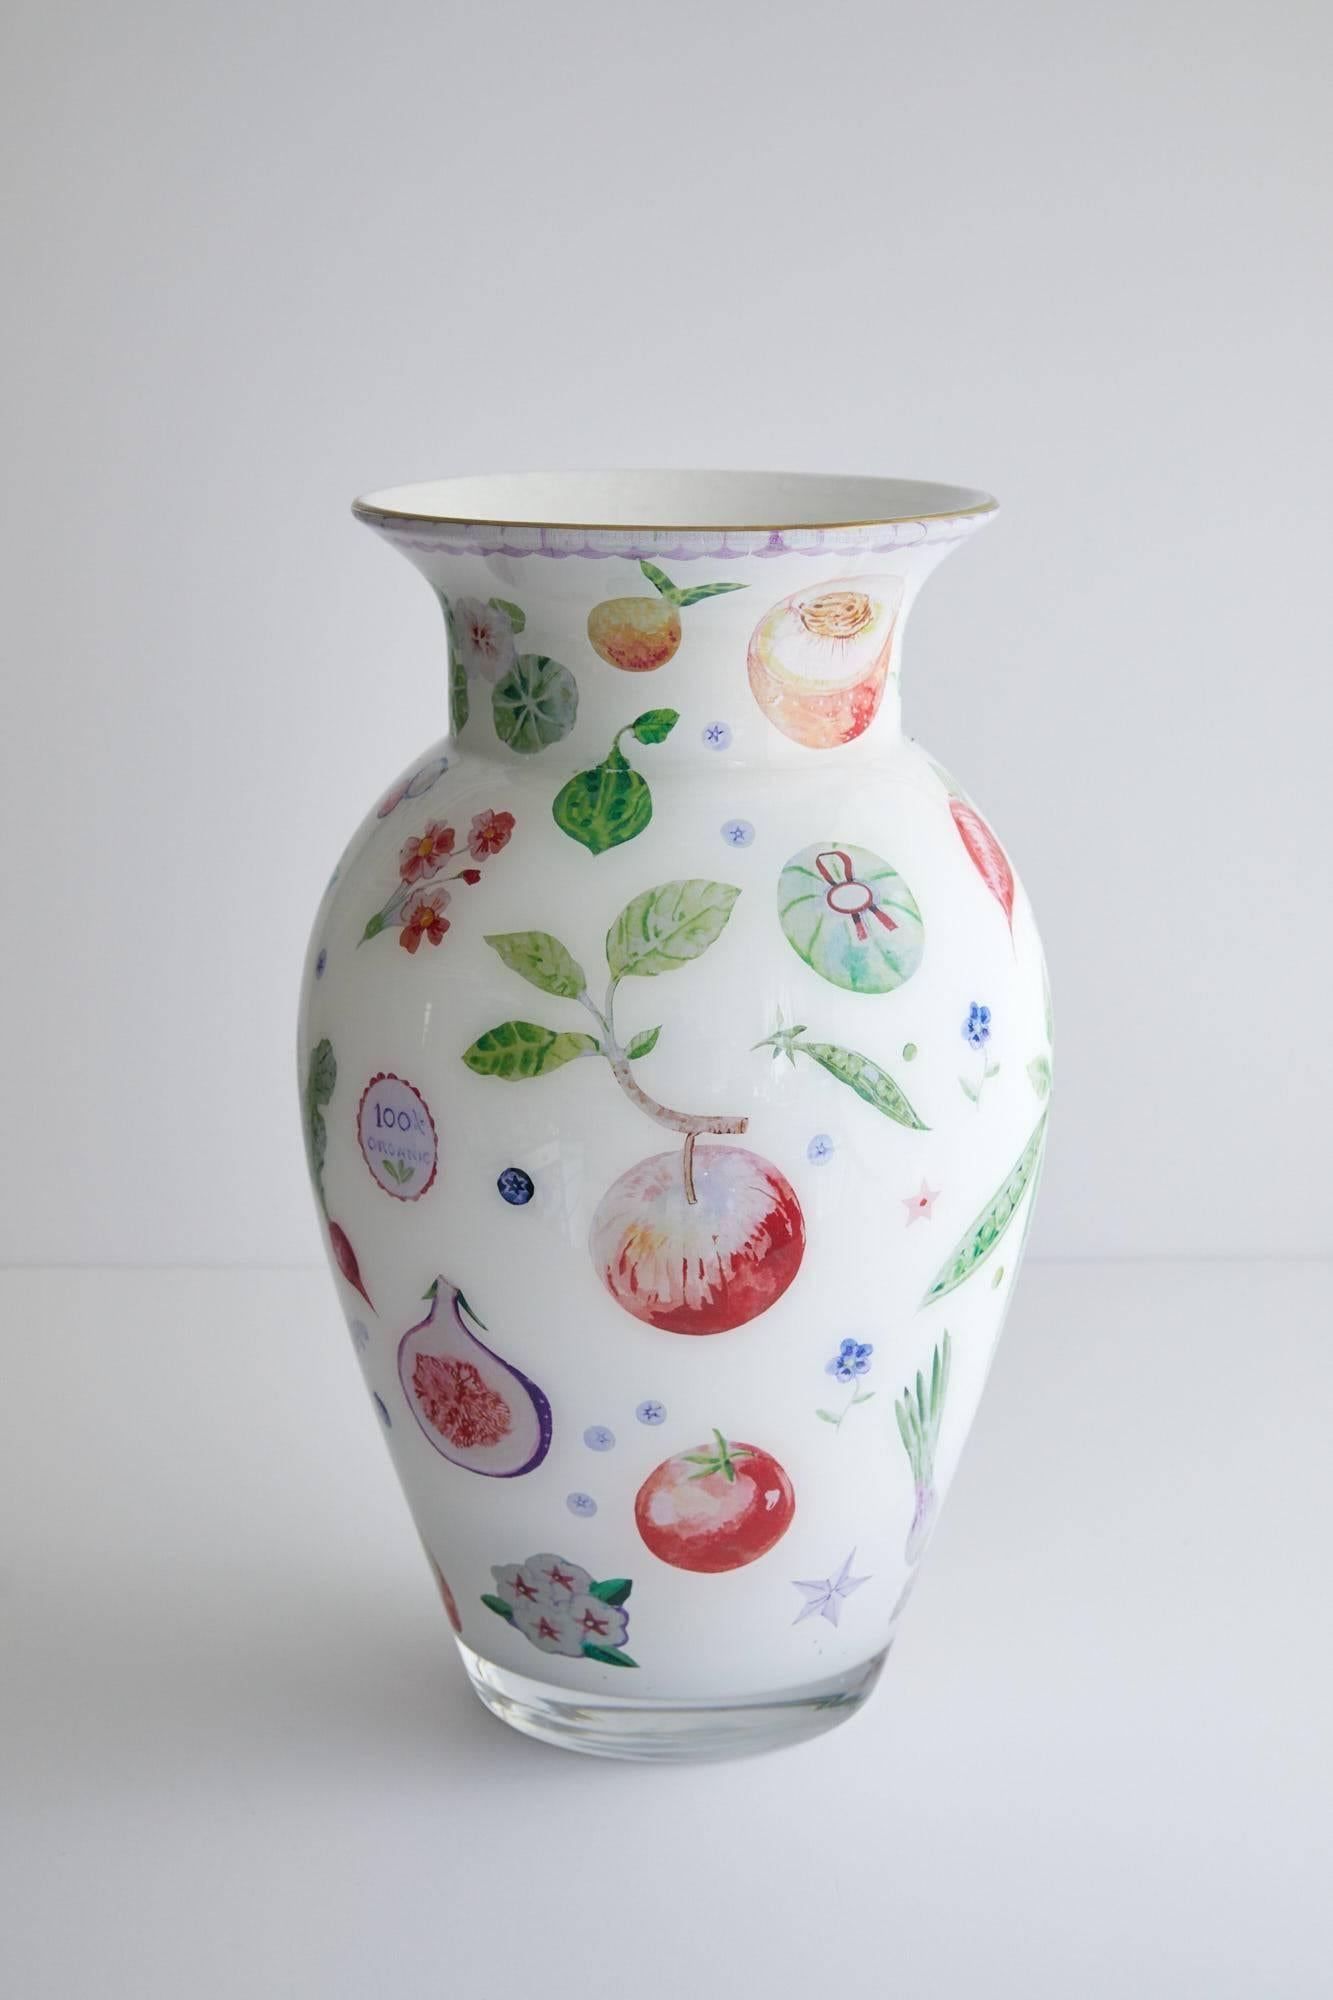 Handmade decoupage classic style vase, designed by Cathy Graham crafted by Scott Potter.